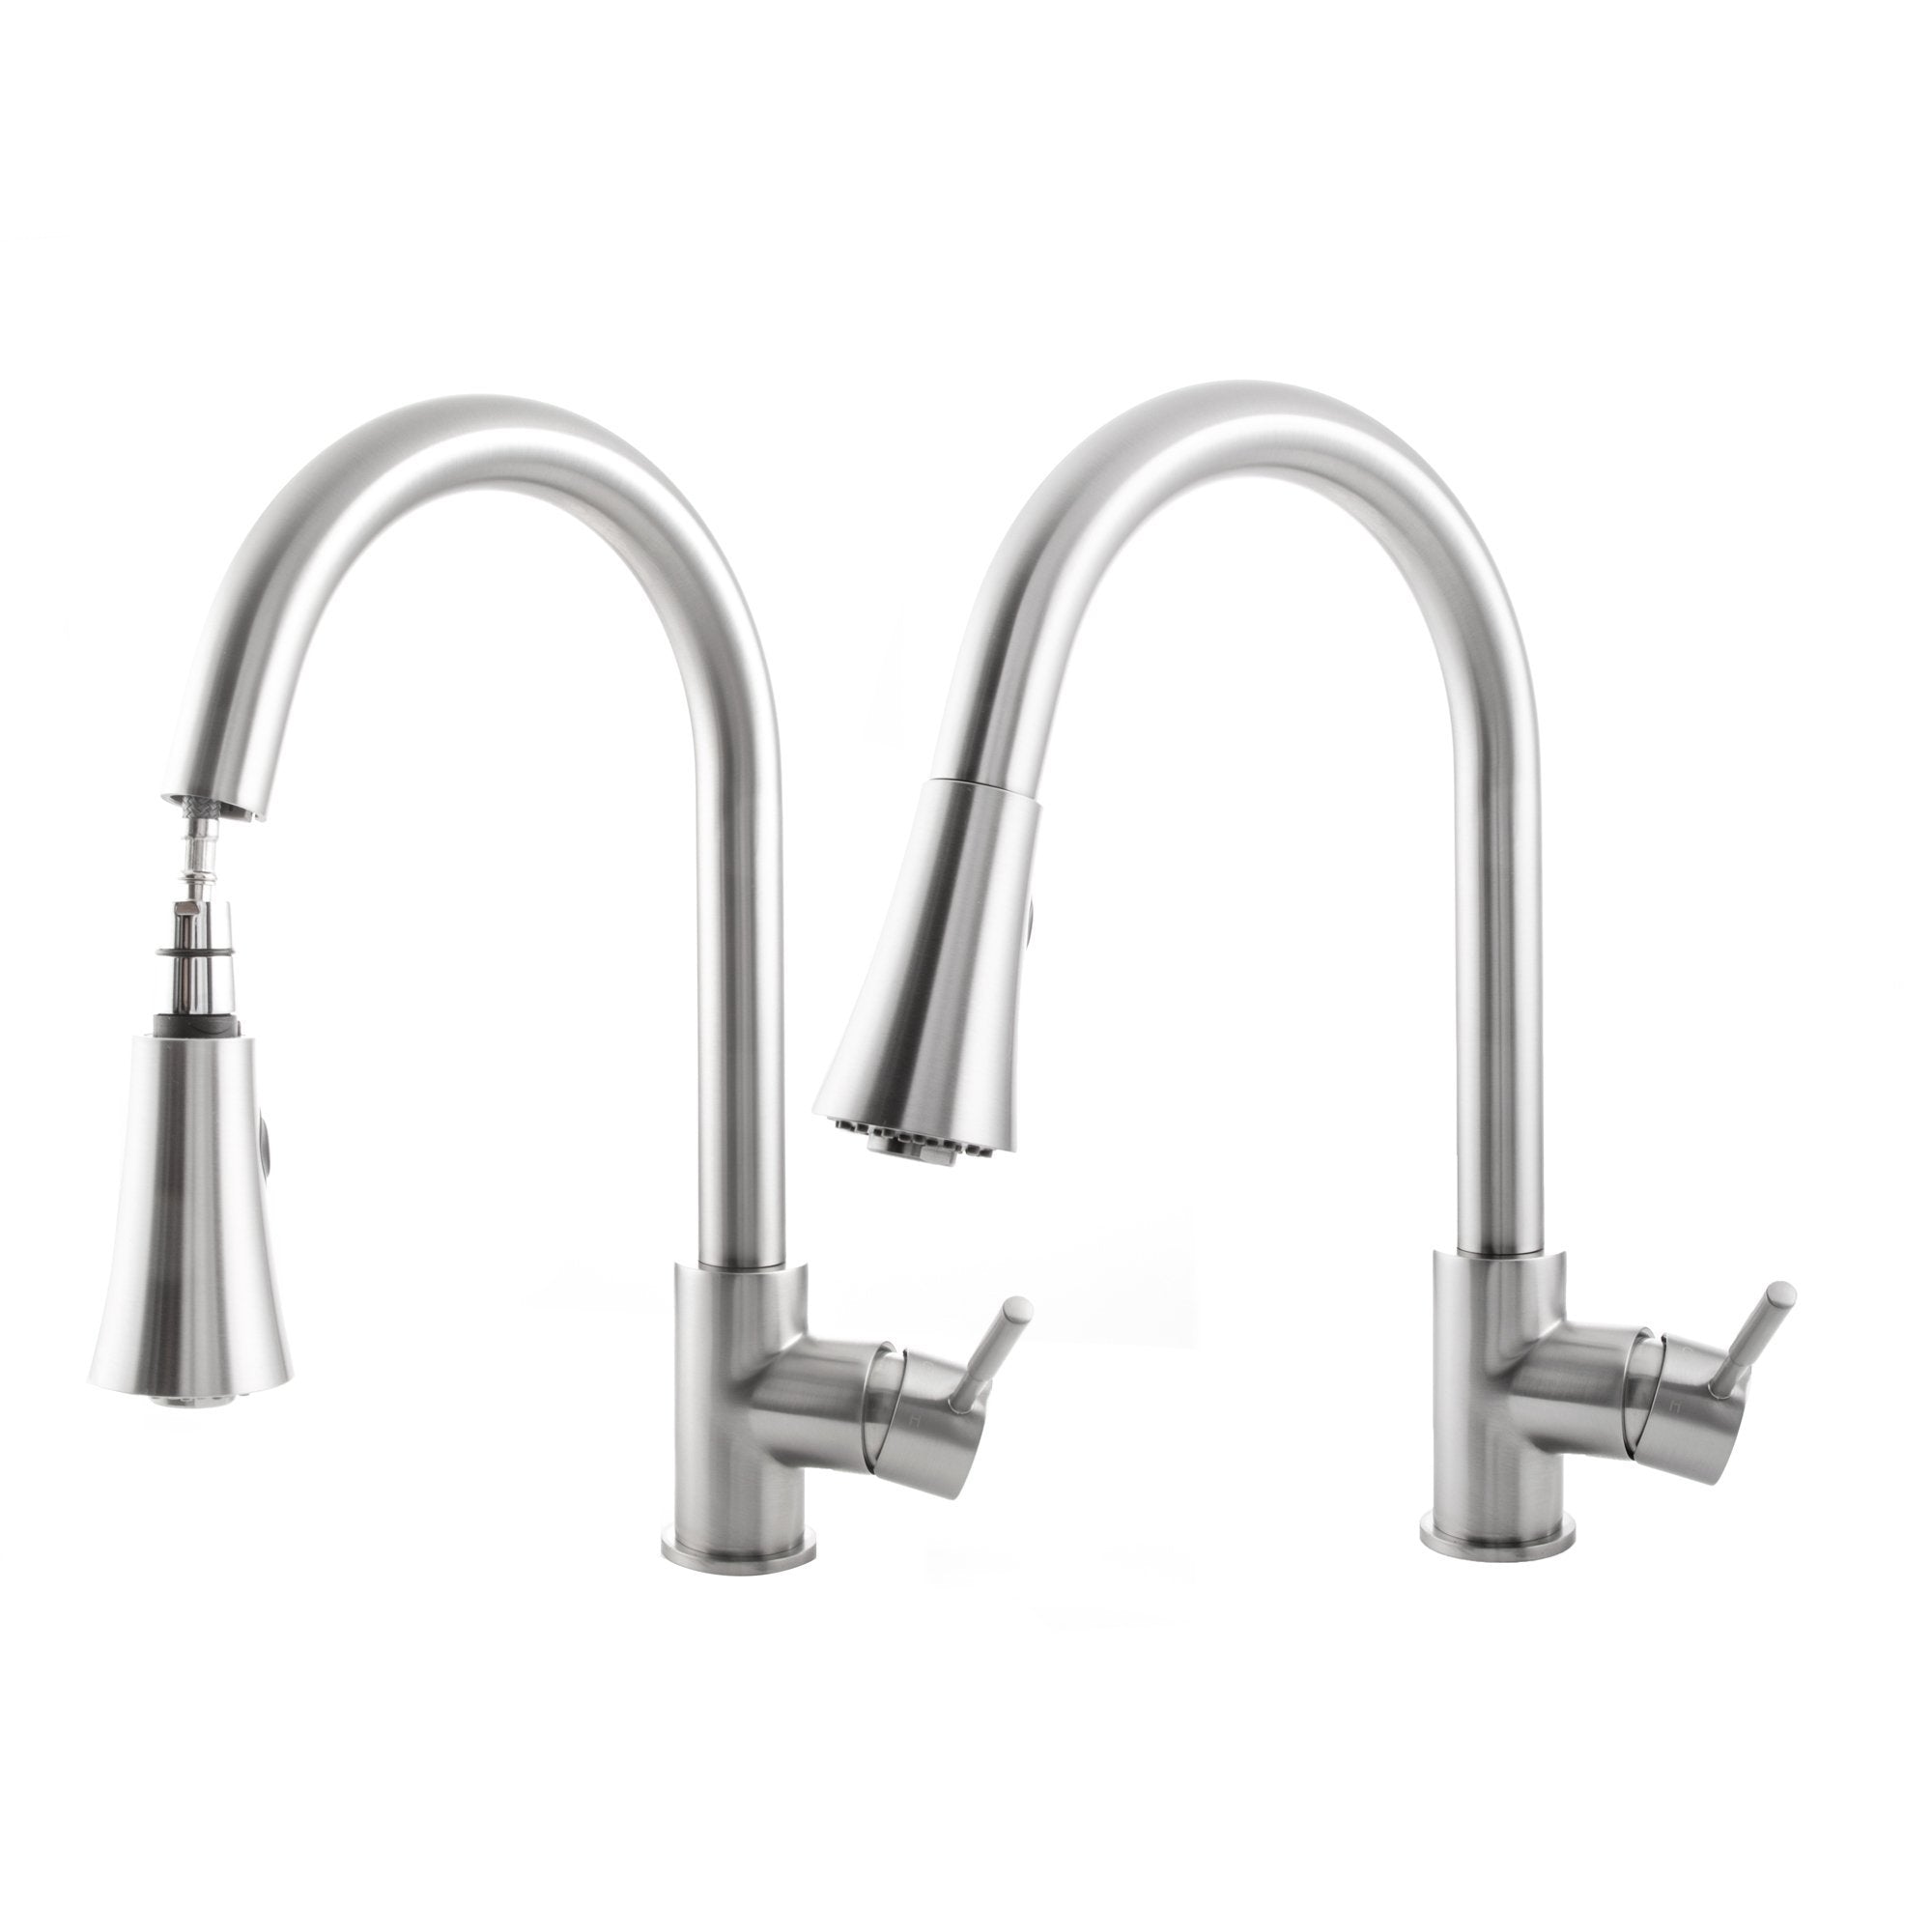 ZLINE Edison Kitchen Faucet (EDS-KF) with pull down spray side by side